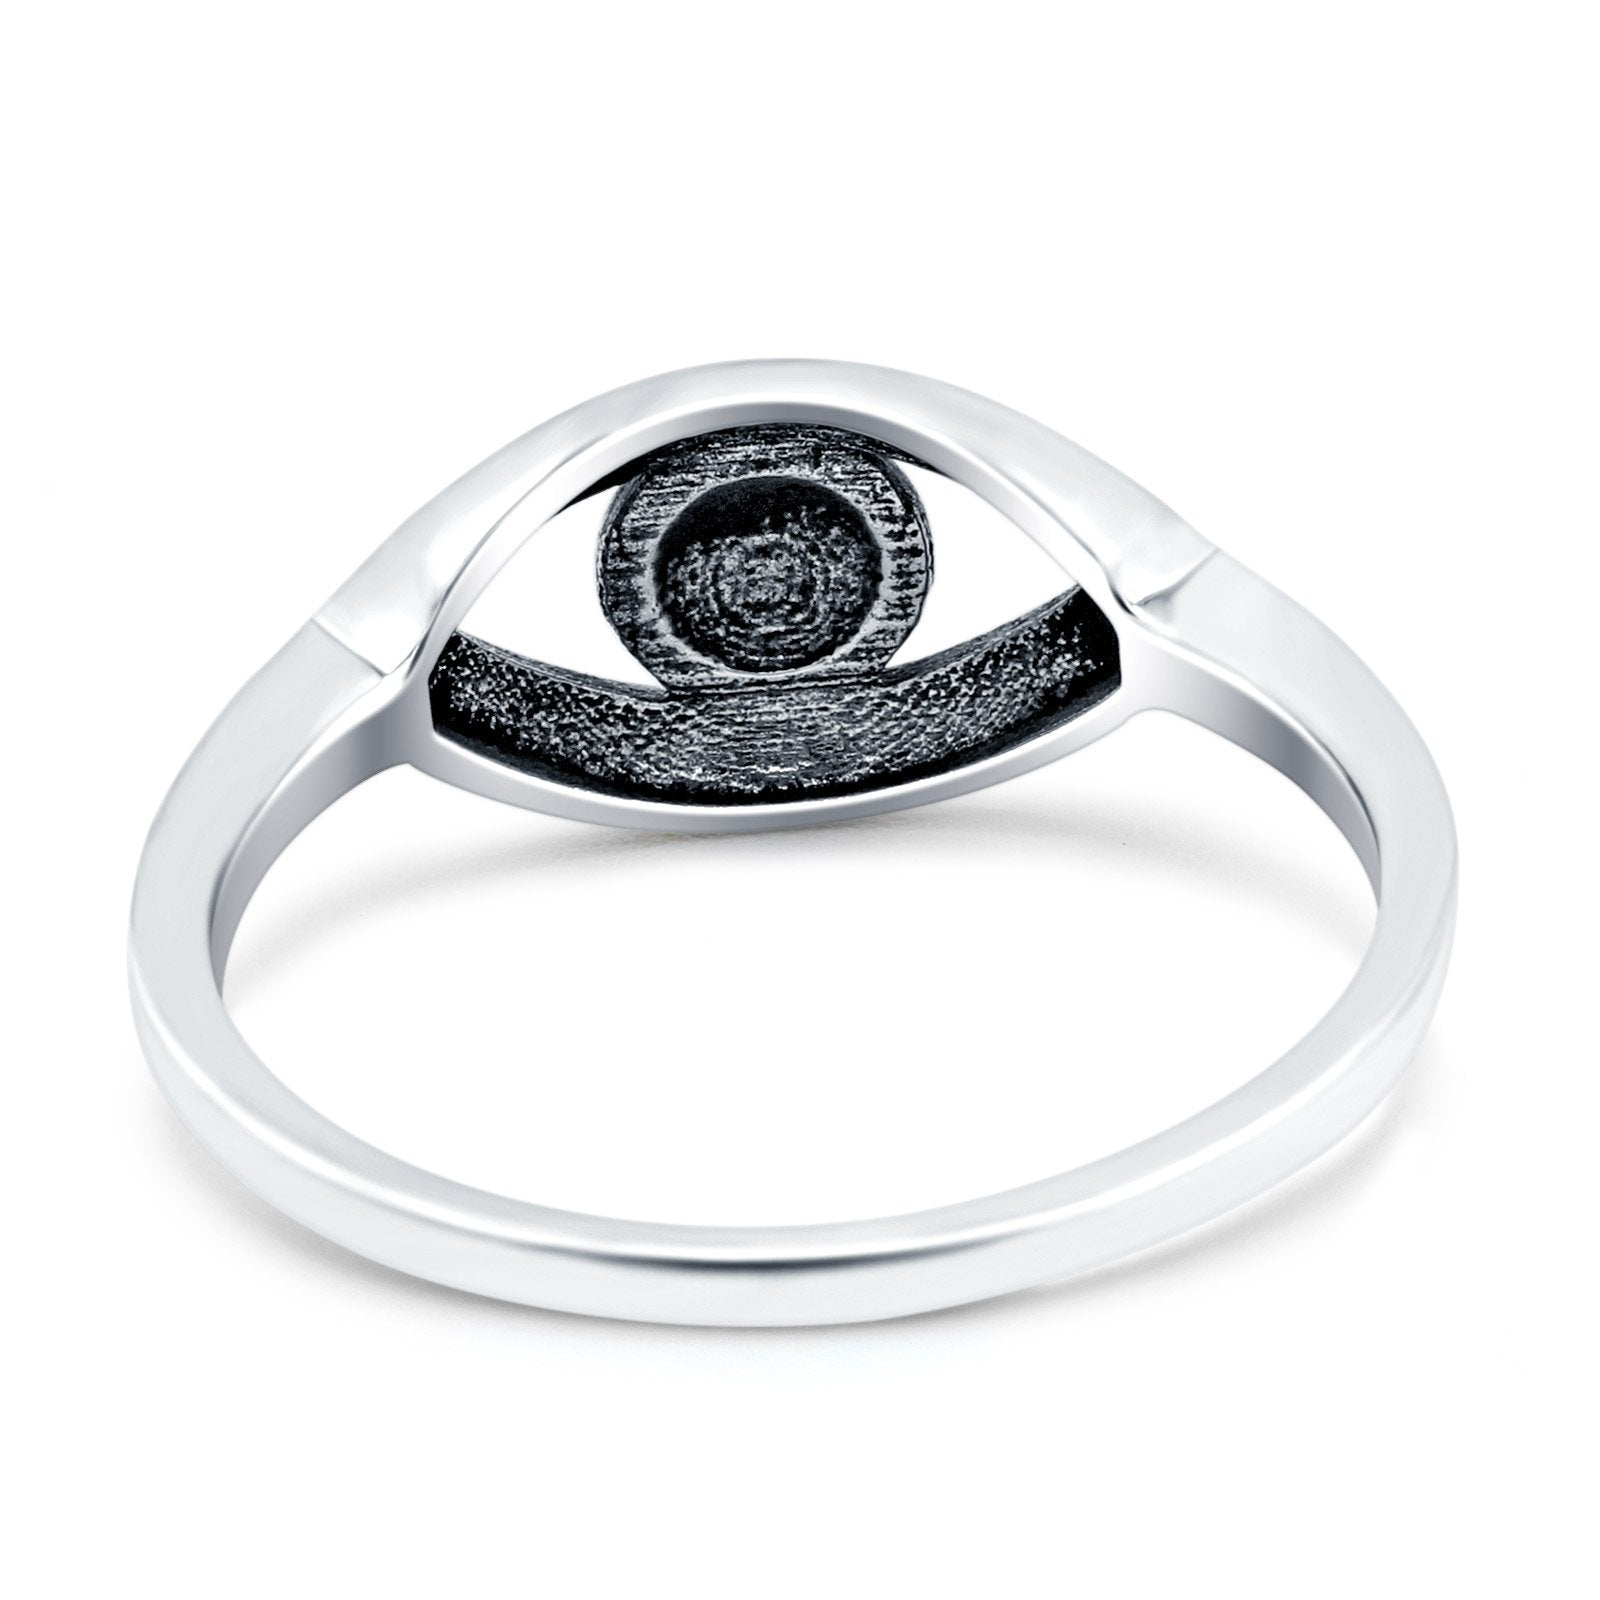 Eye Ring Oxidized Band Solid 925 Sterling Silver (8mm)